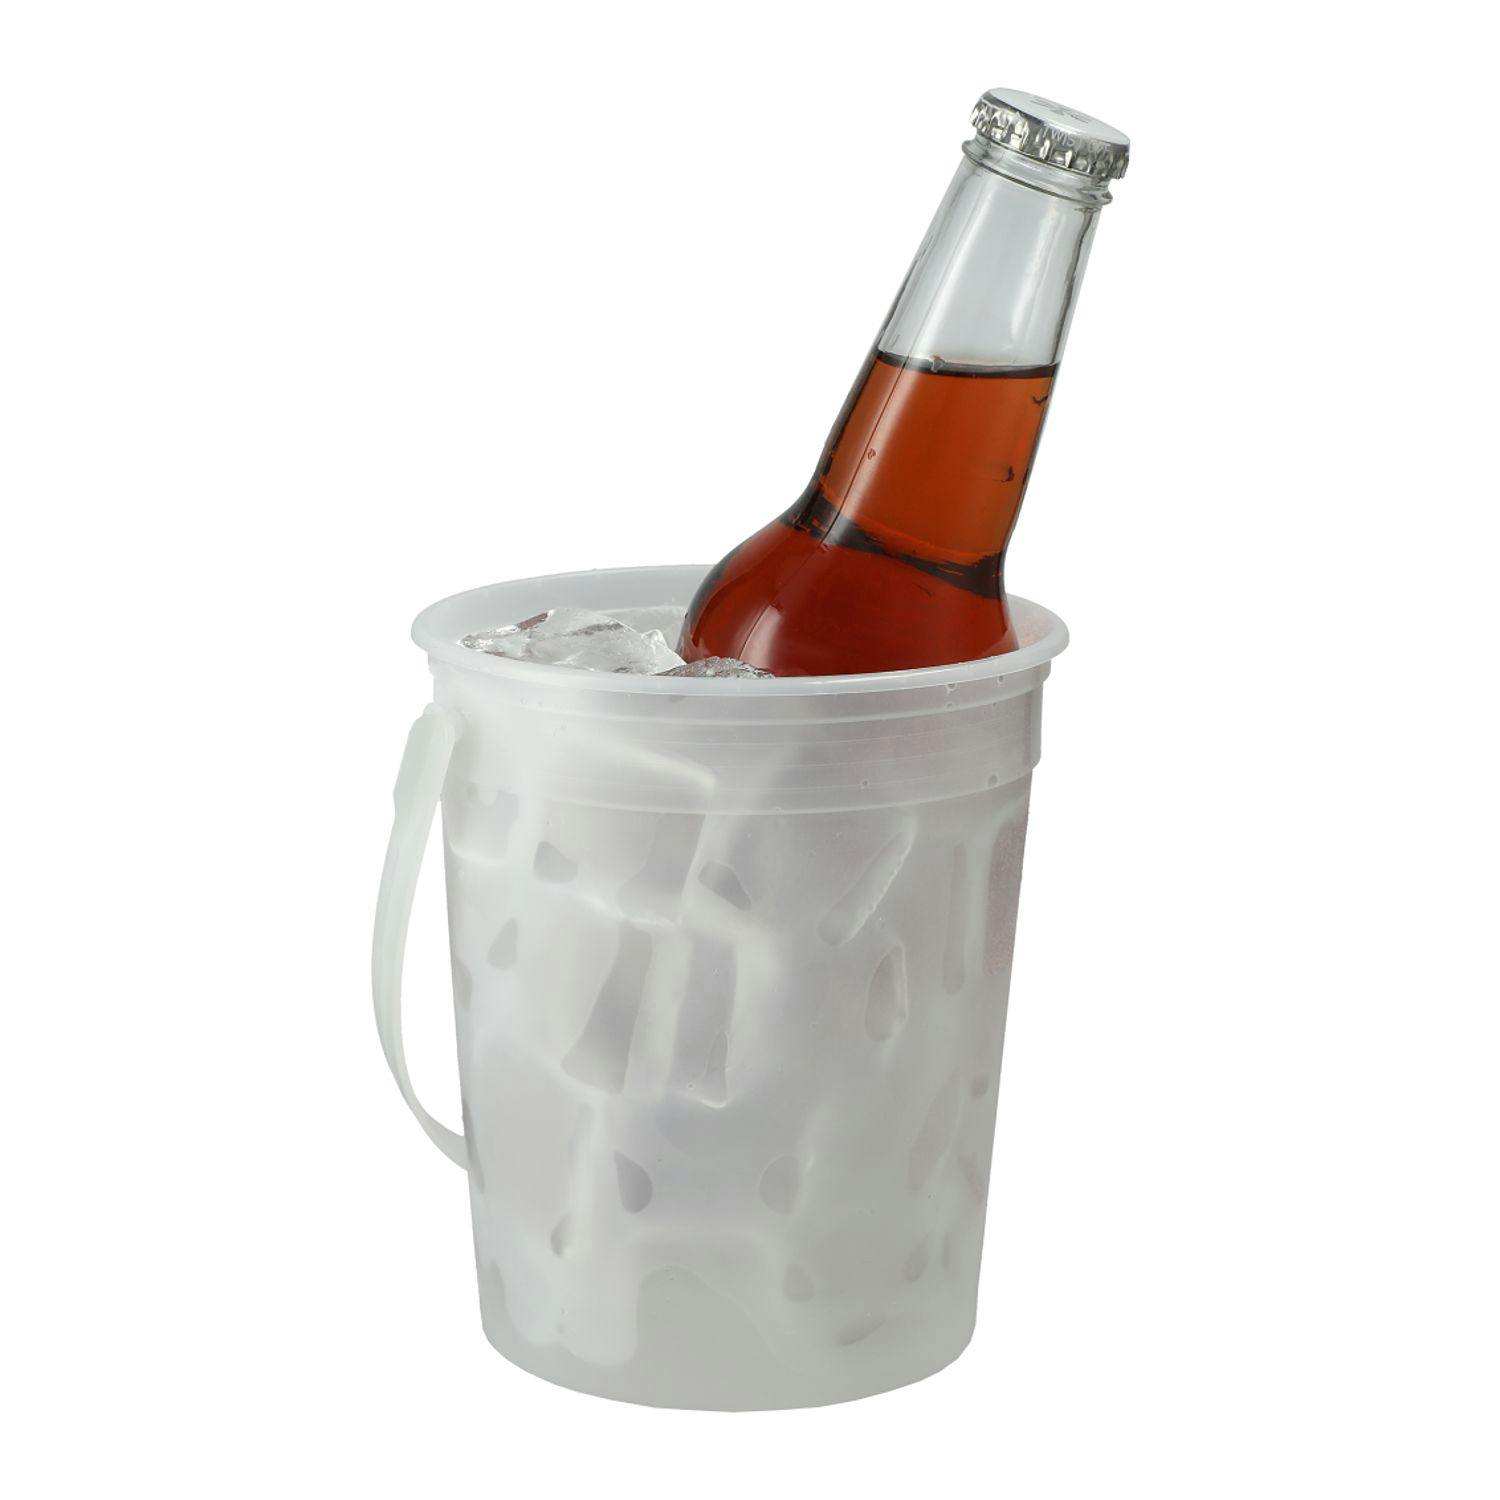 32oz Pail with Handle - additional Image 3